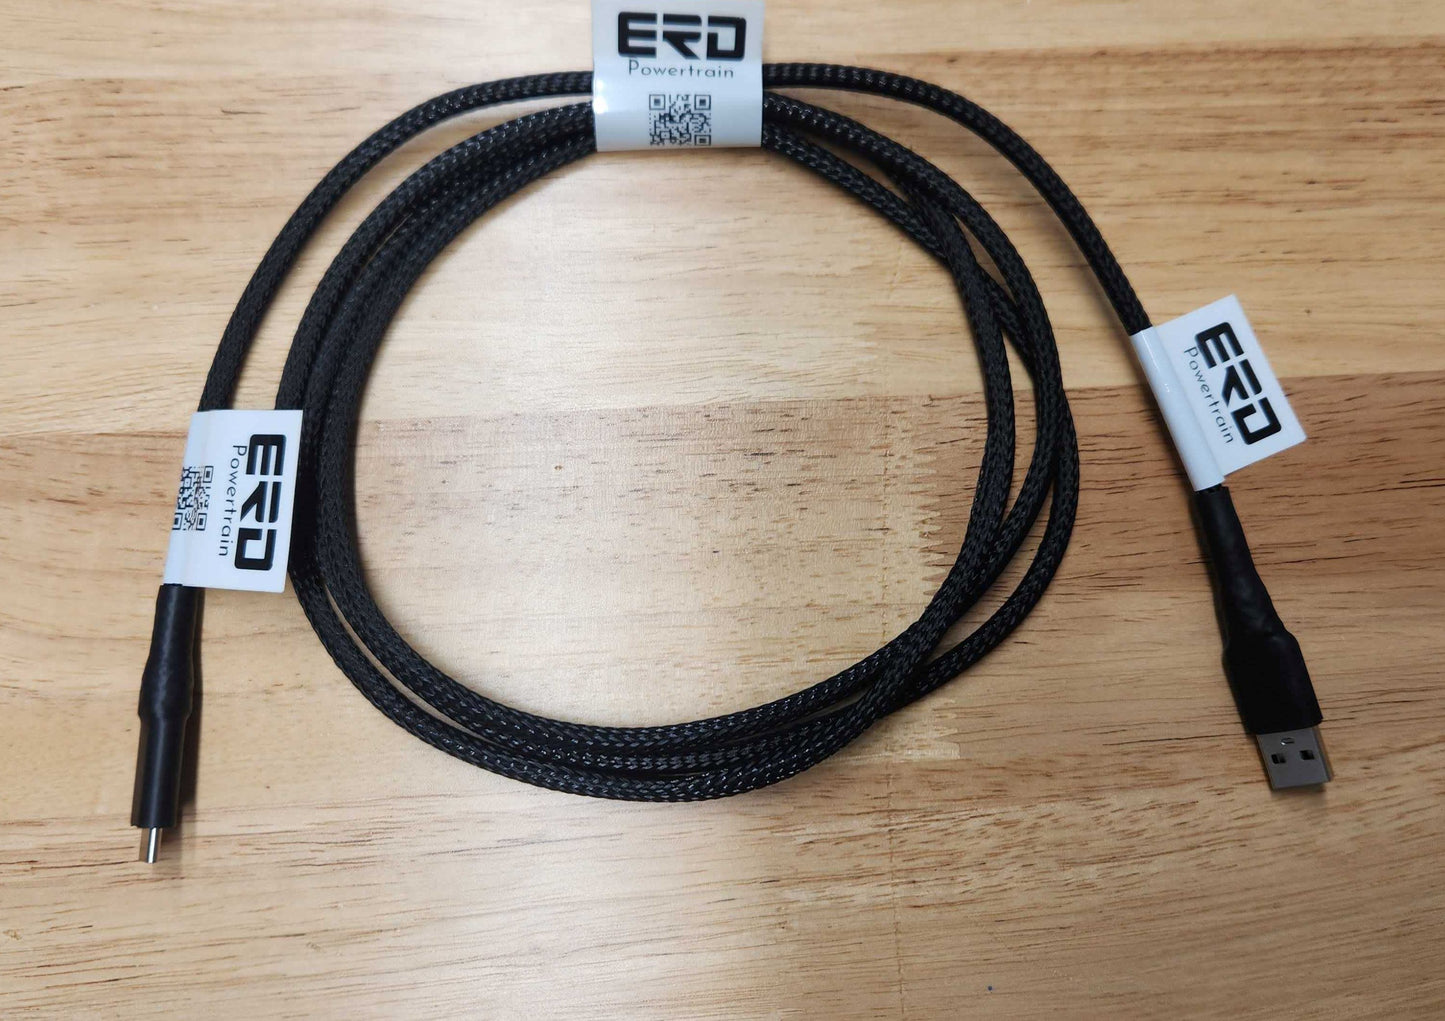 ERD Fast USB cables